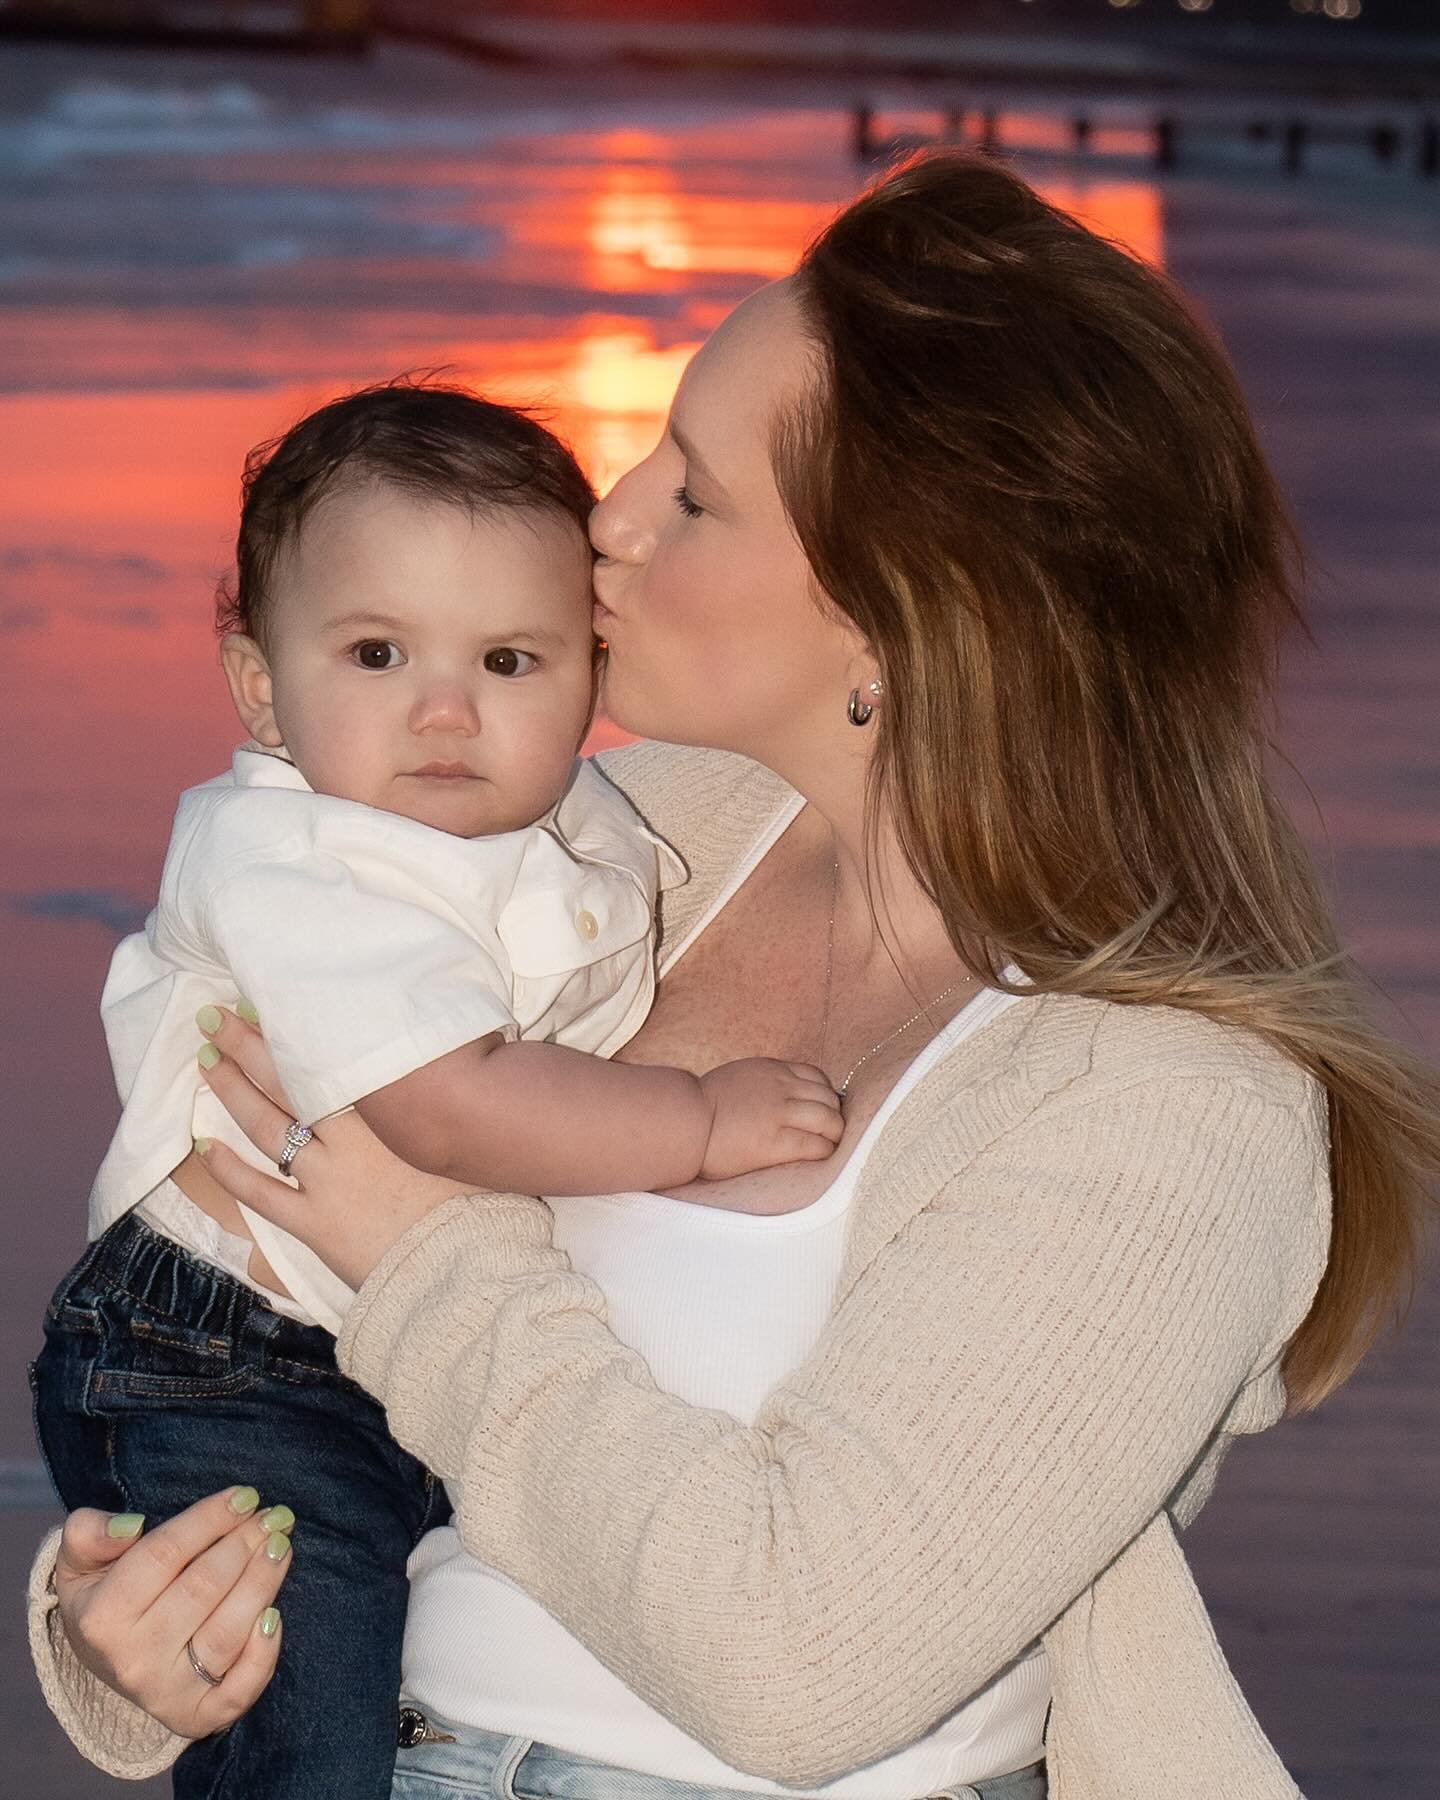 My second shoot with this little guy &amp; his family.  #year1 #familyphotography #sunset #familyportraits #brigantinebeach #maternityshoot